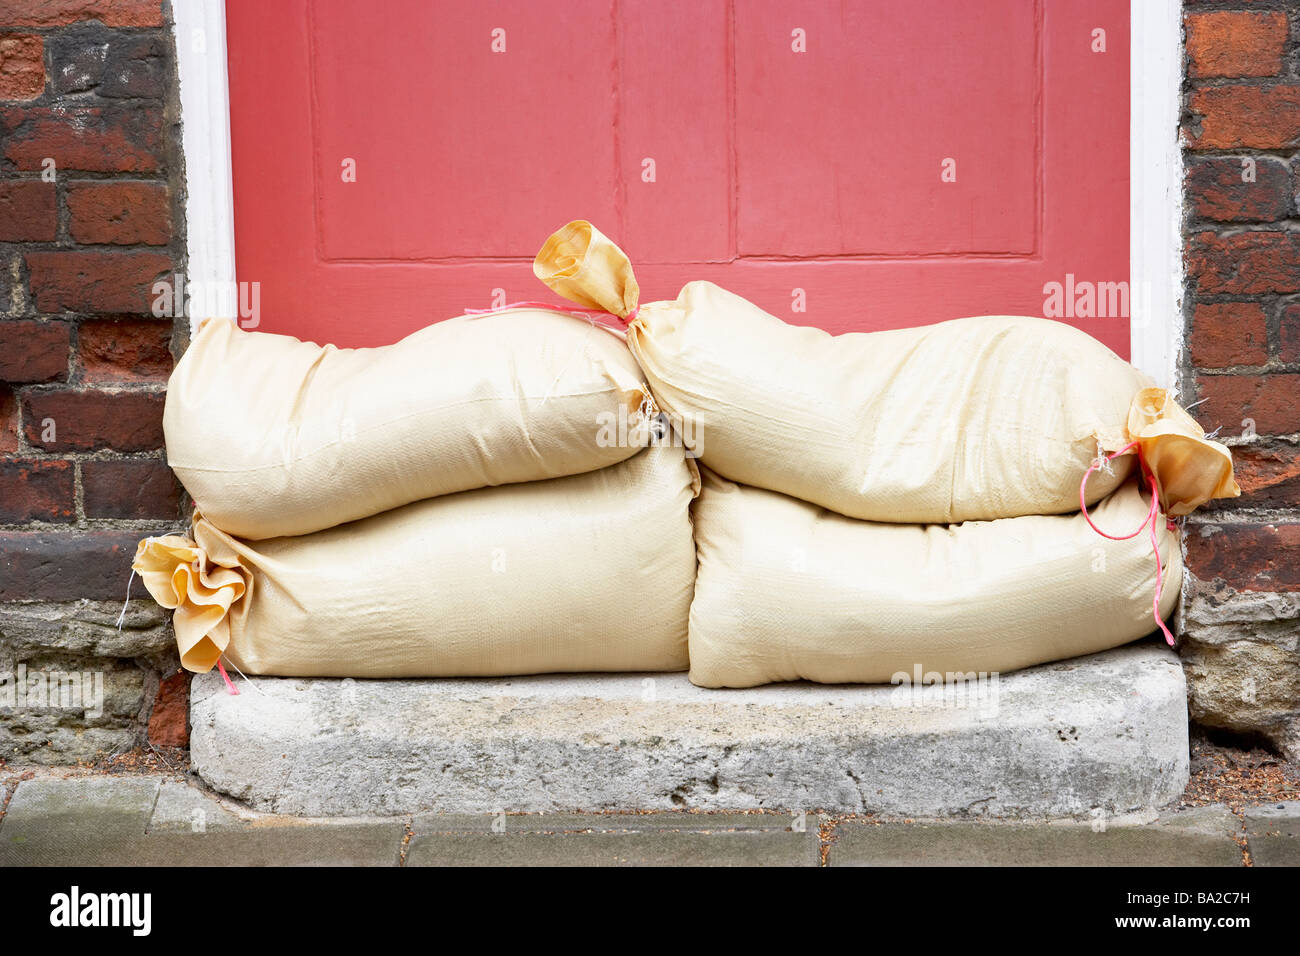 Sandbags Stacked In A Doorway In Preparation For Flooding Stock Photo